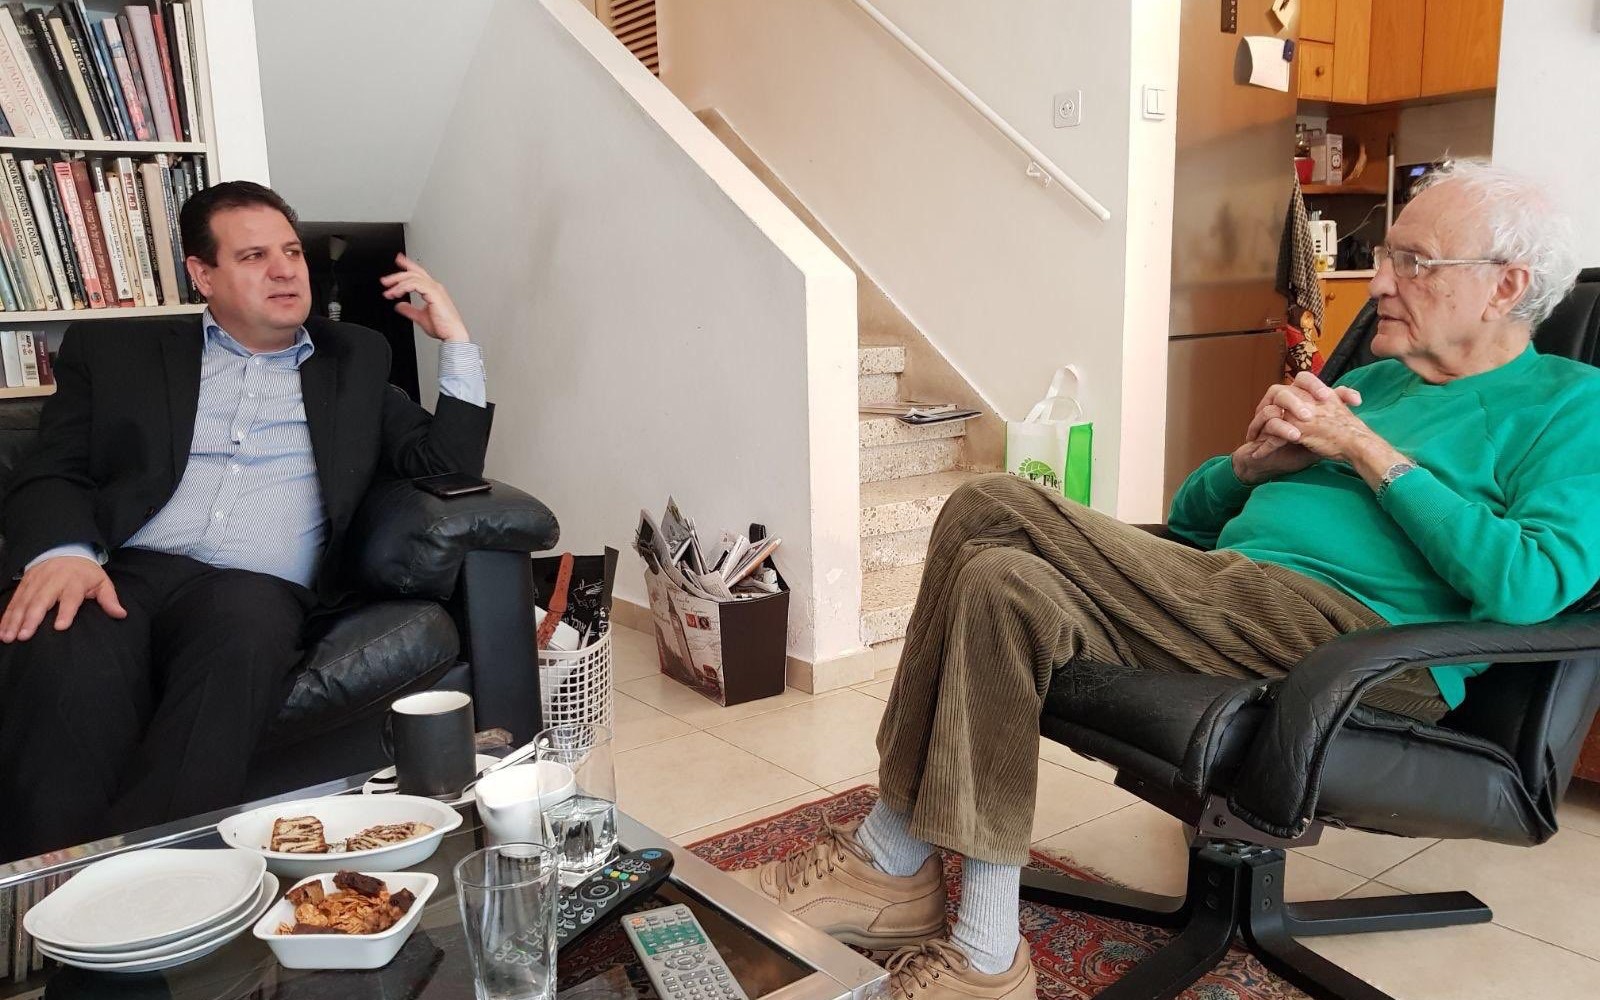 MK Ayman Odeh, head of the Joint List, (left) meets with Zeev Sternhell at the home of the late Israeli historian and political scientist's in 2017.